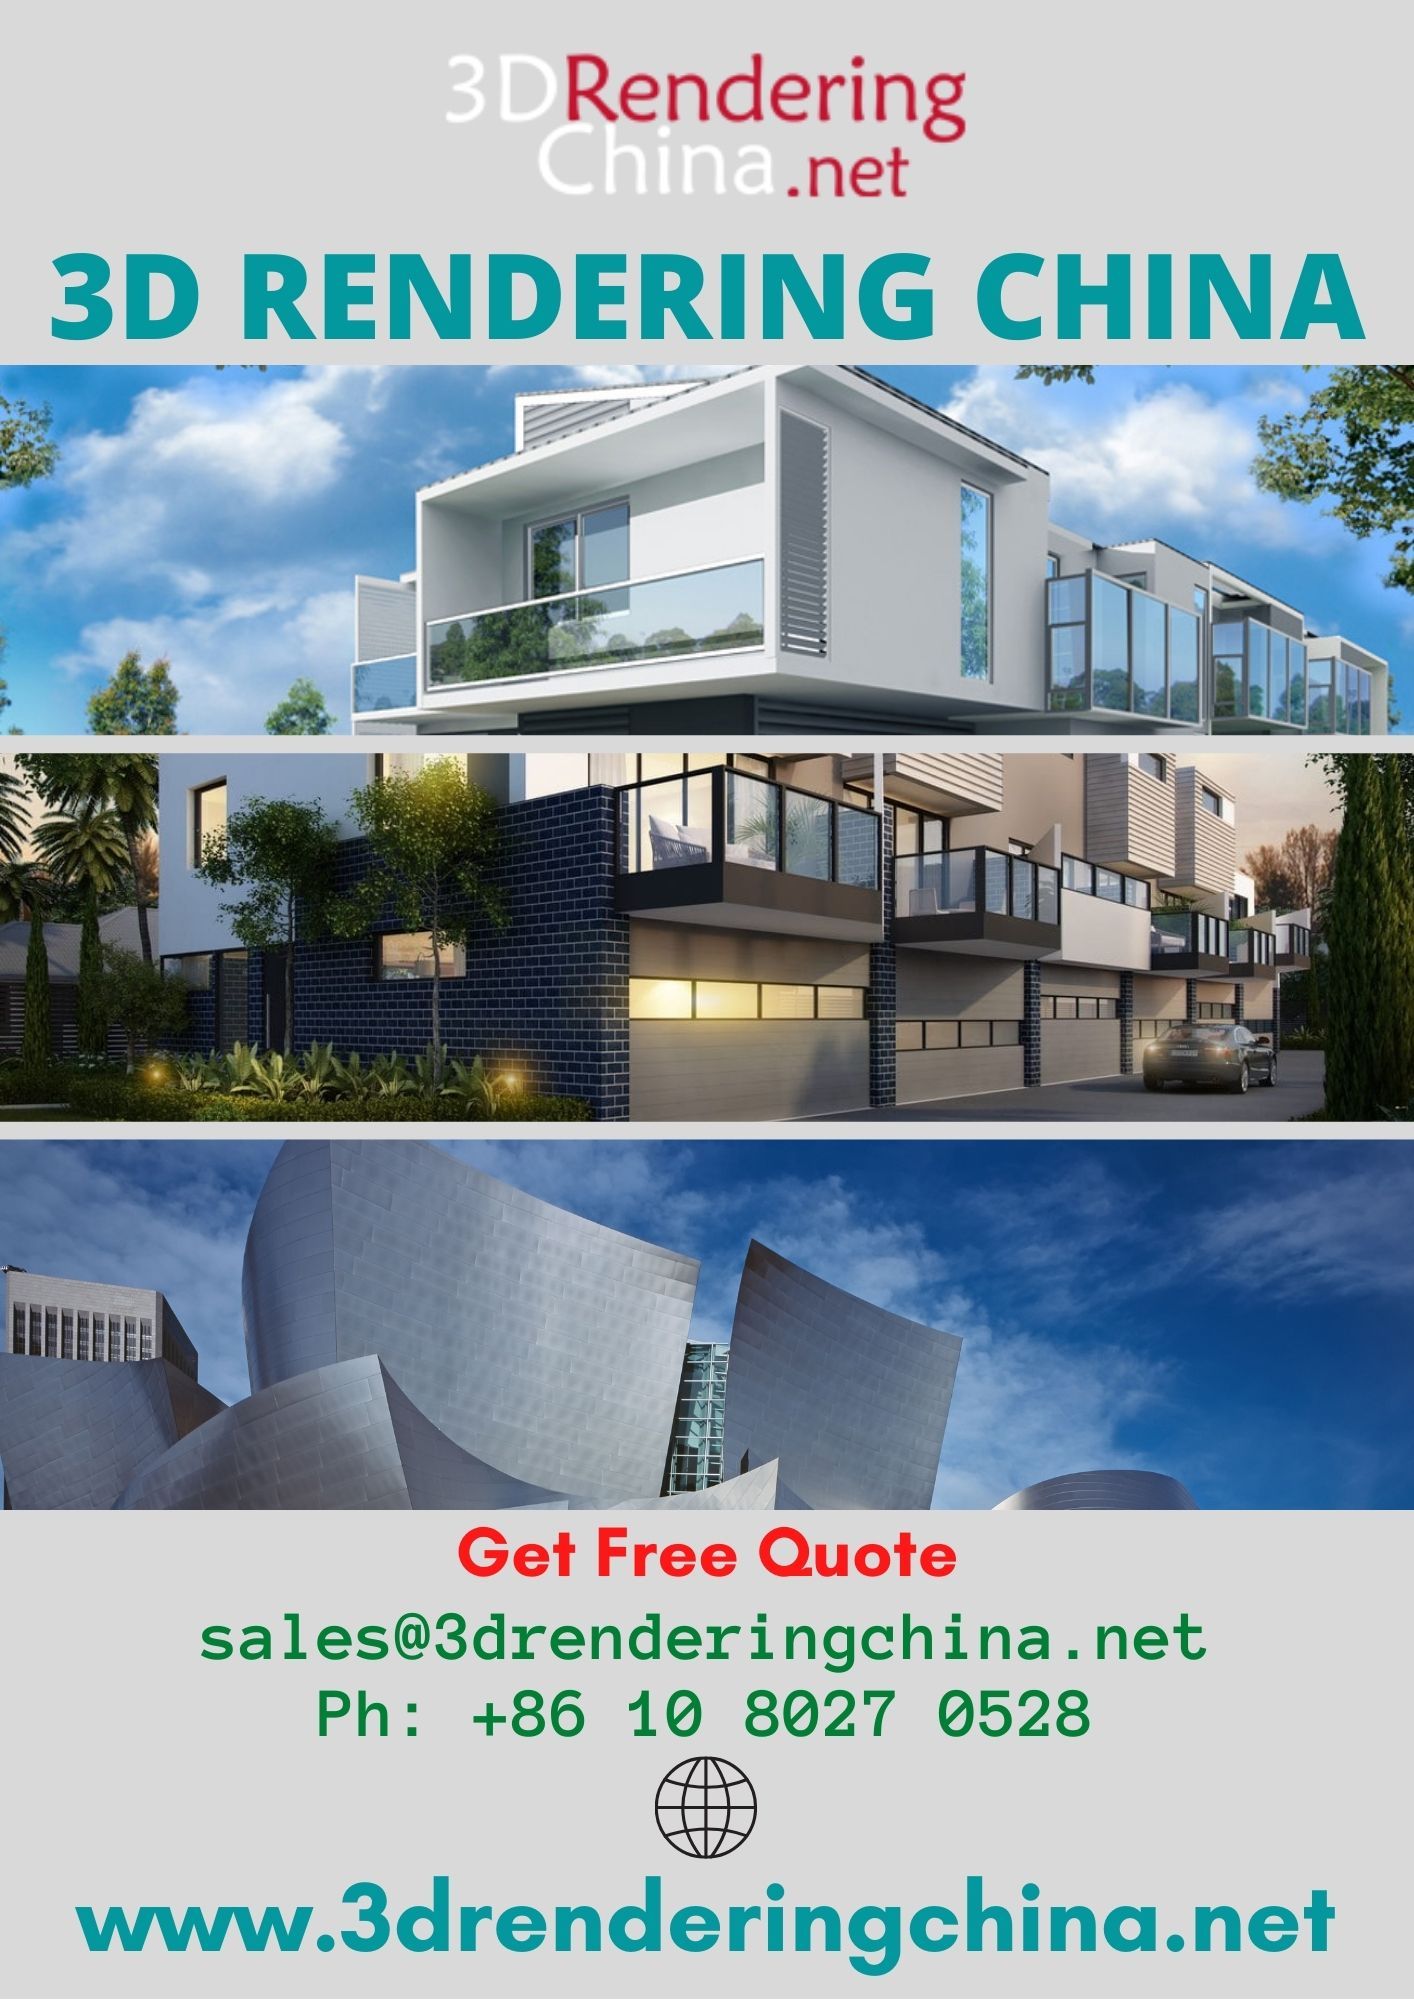 3D Rendering Services in China